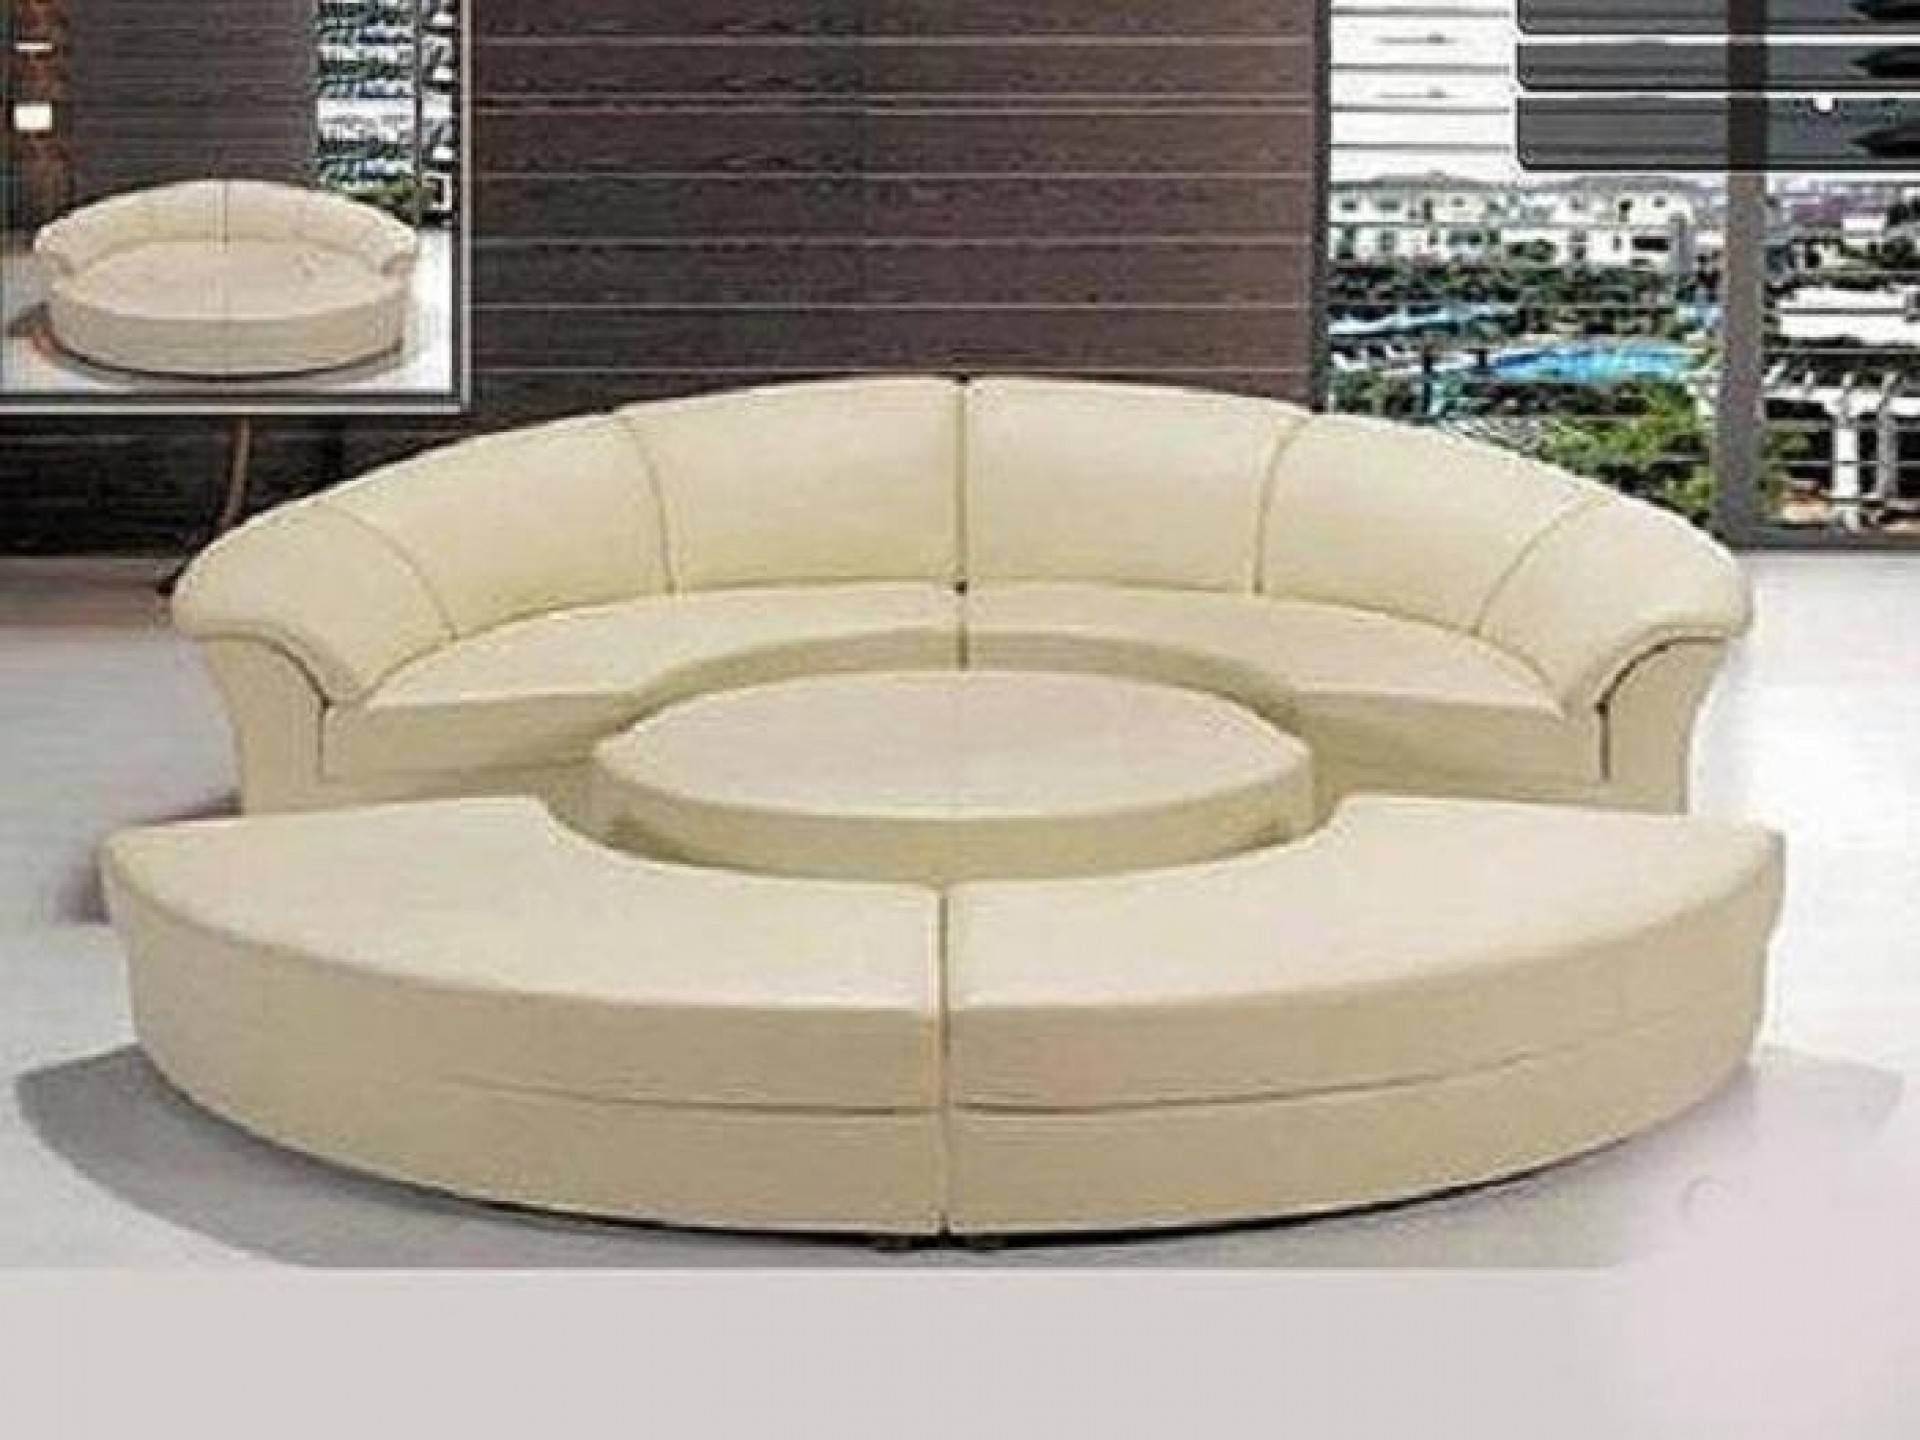 Sofa Round Sectional Bed | Tamingthesat Regarding Round Sectional Sofa Bed (View 1 of 25)